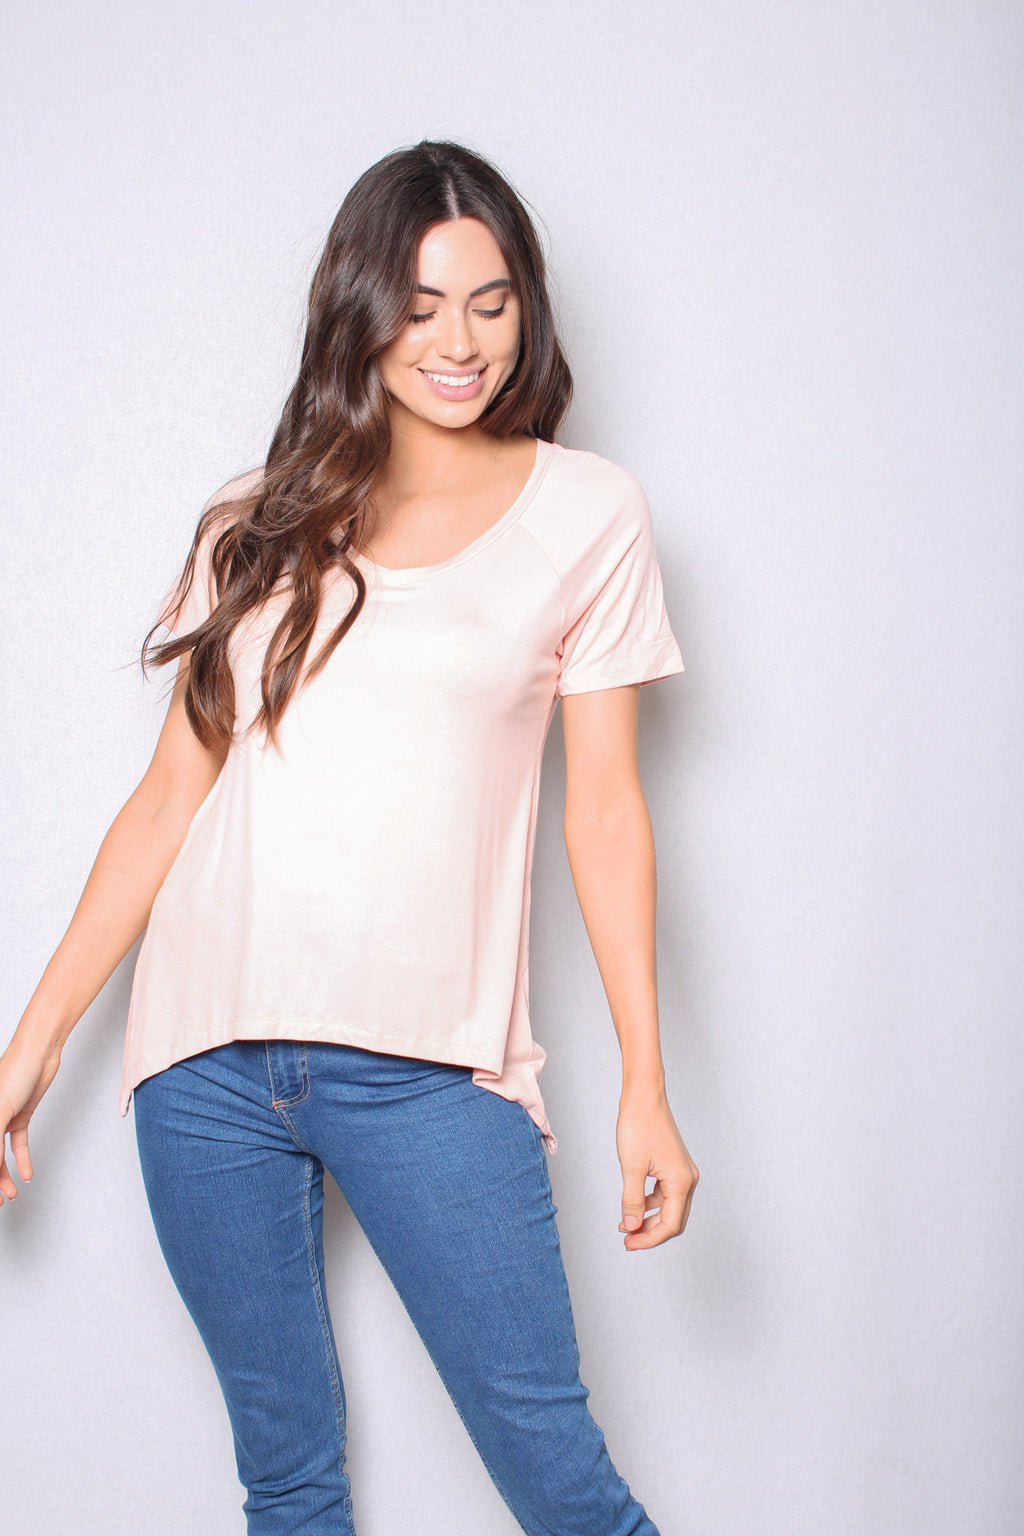 Women's Round Neck Short Sleeves Casual T-Shirt